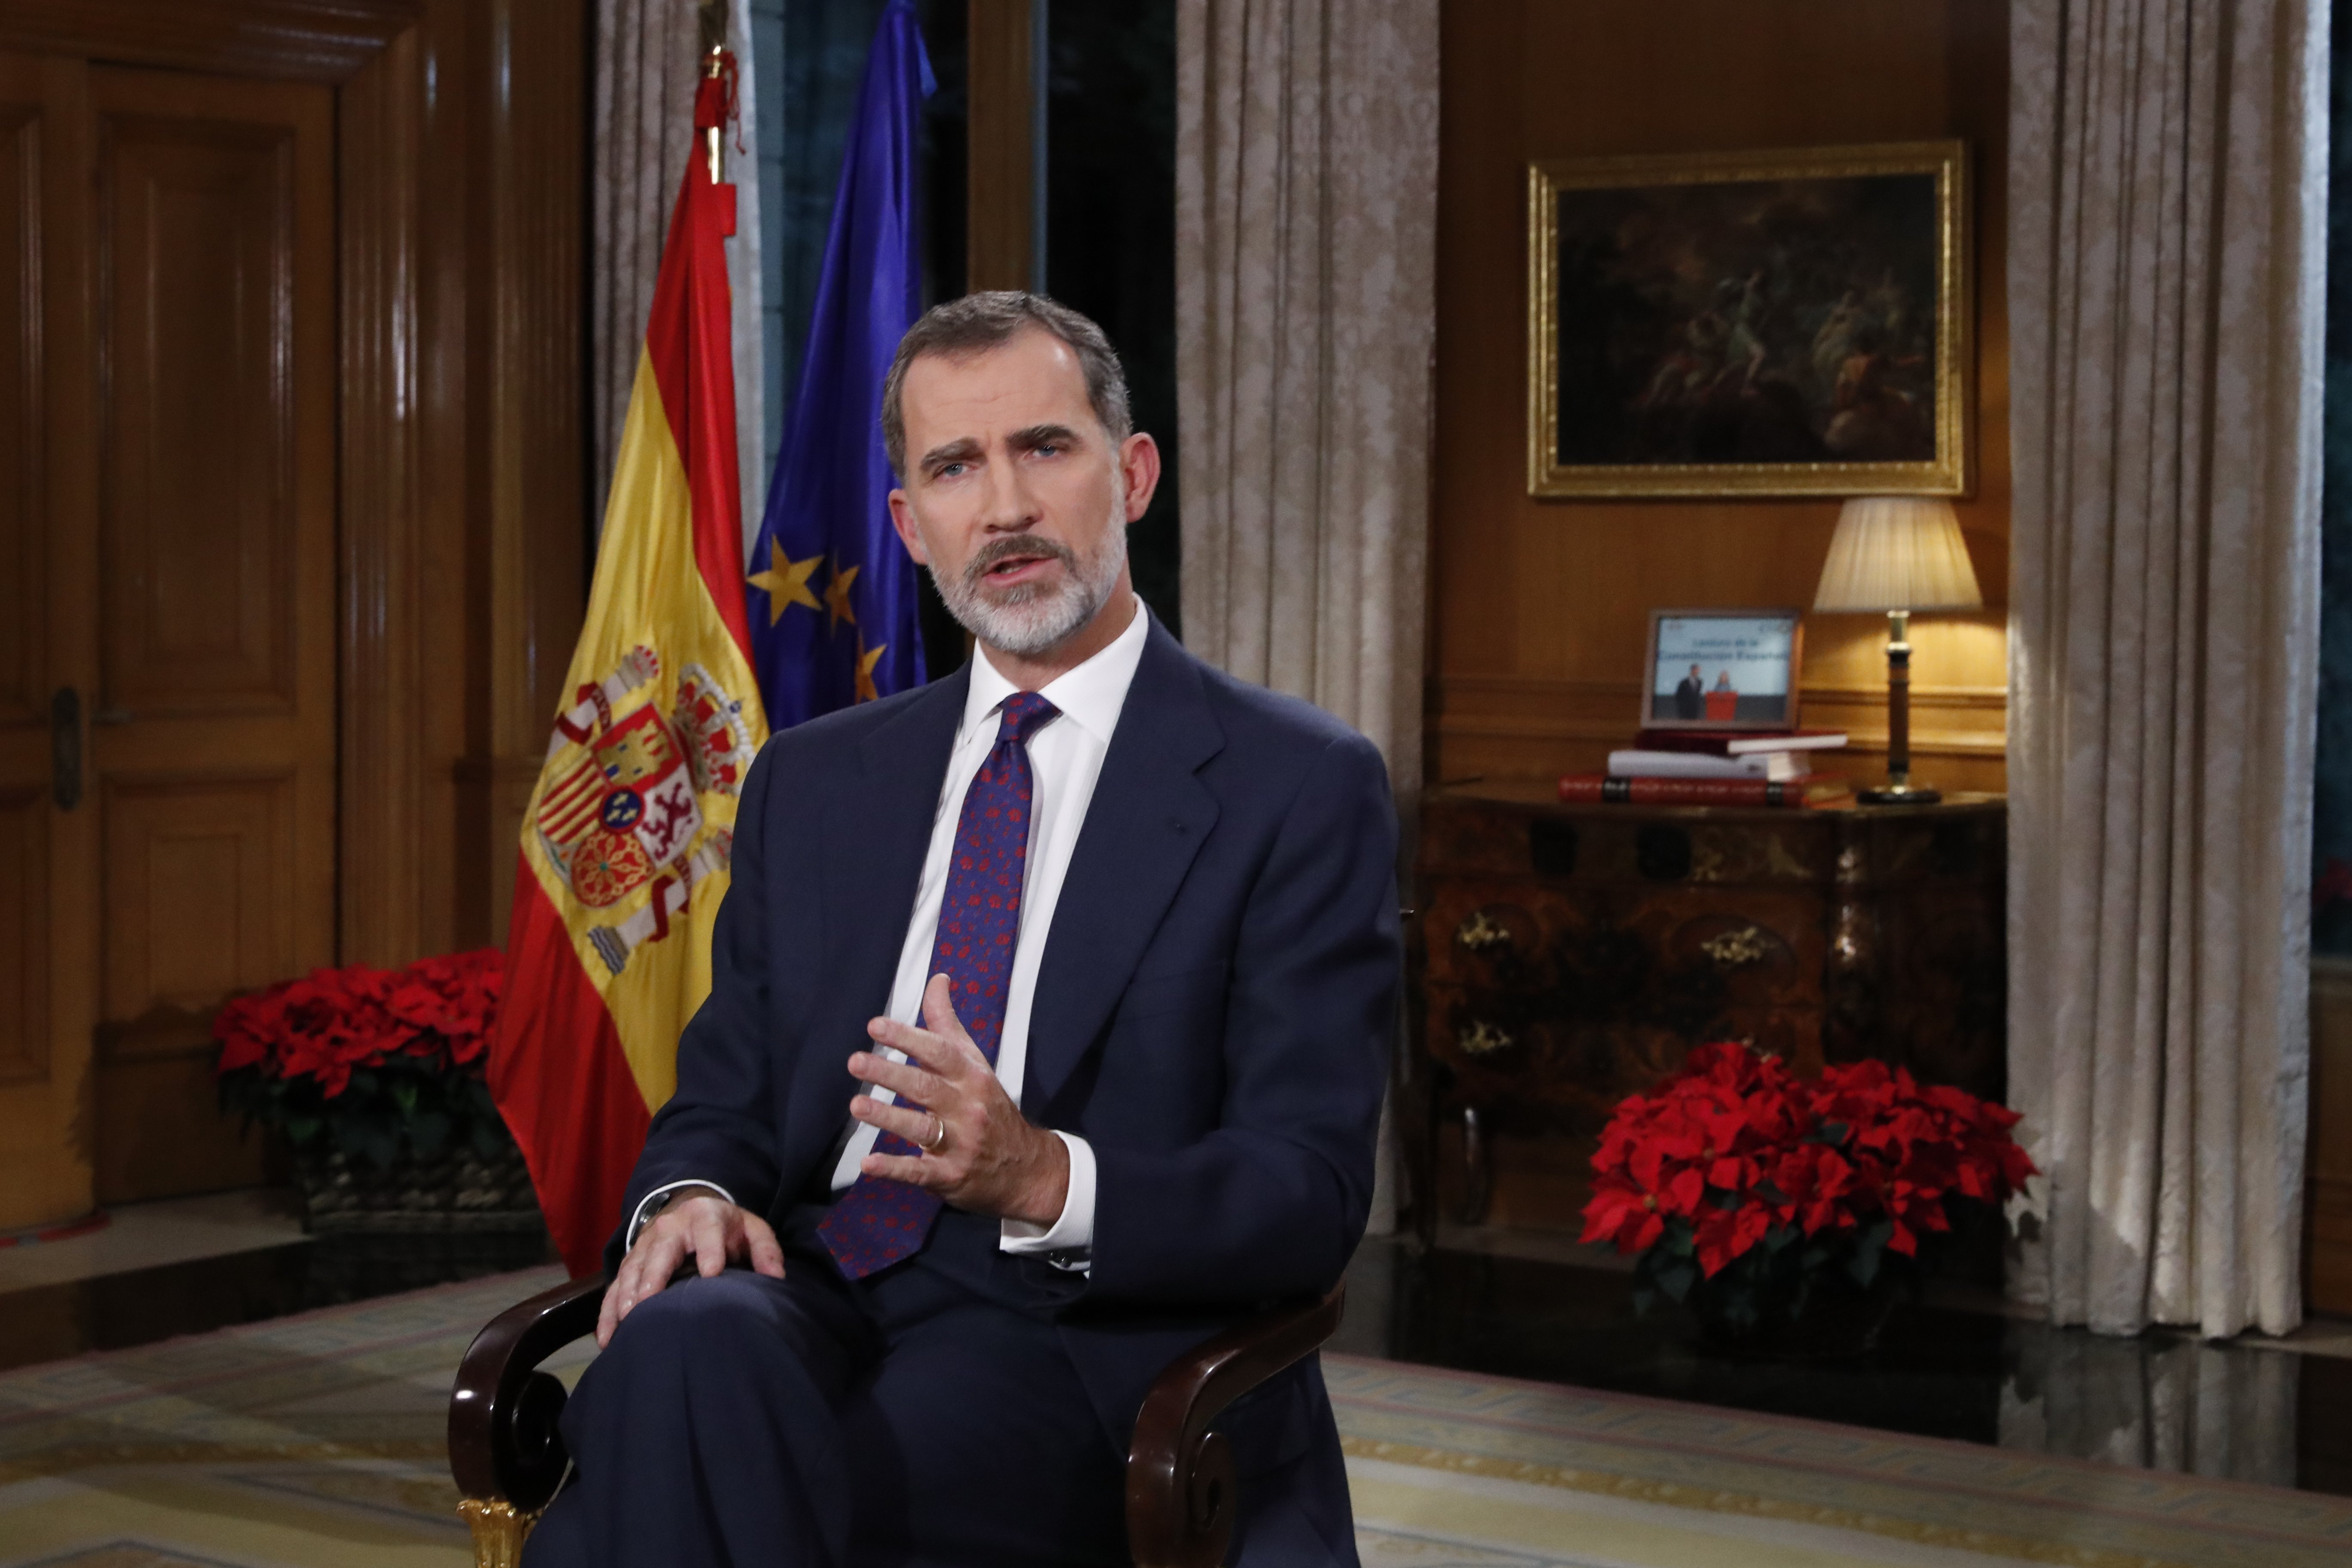 Felipe VI digs in: Christmas warnings on social harmony and "respecting" the Spanish Constitution